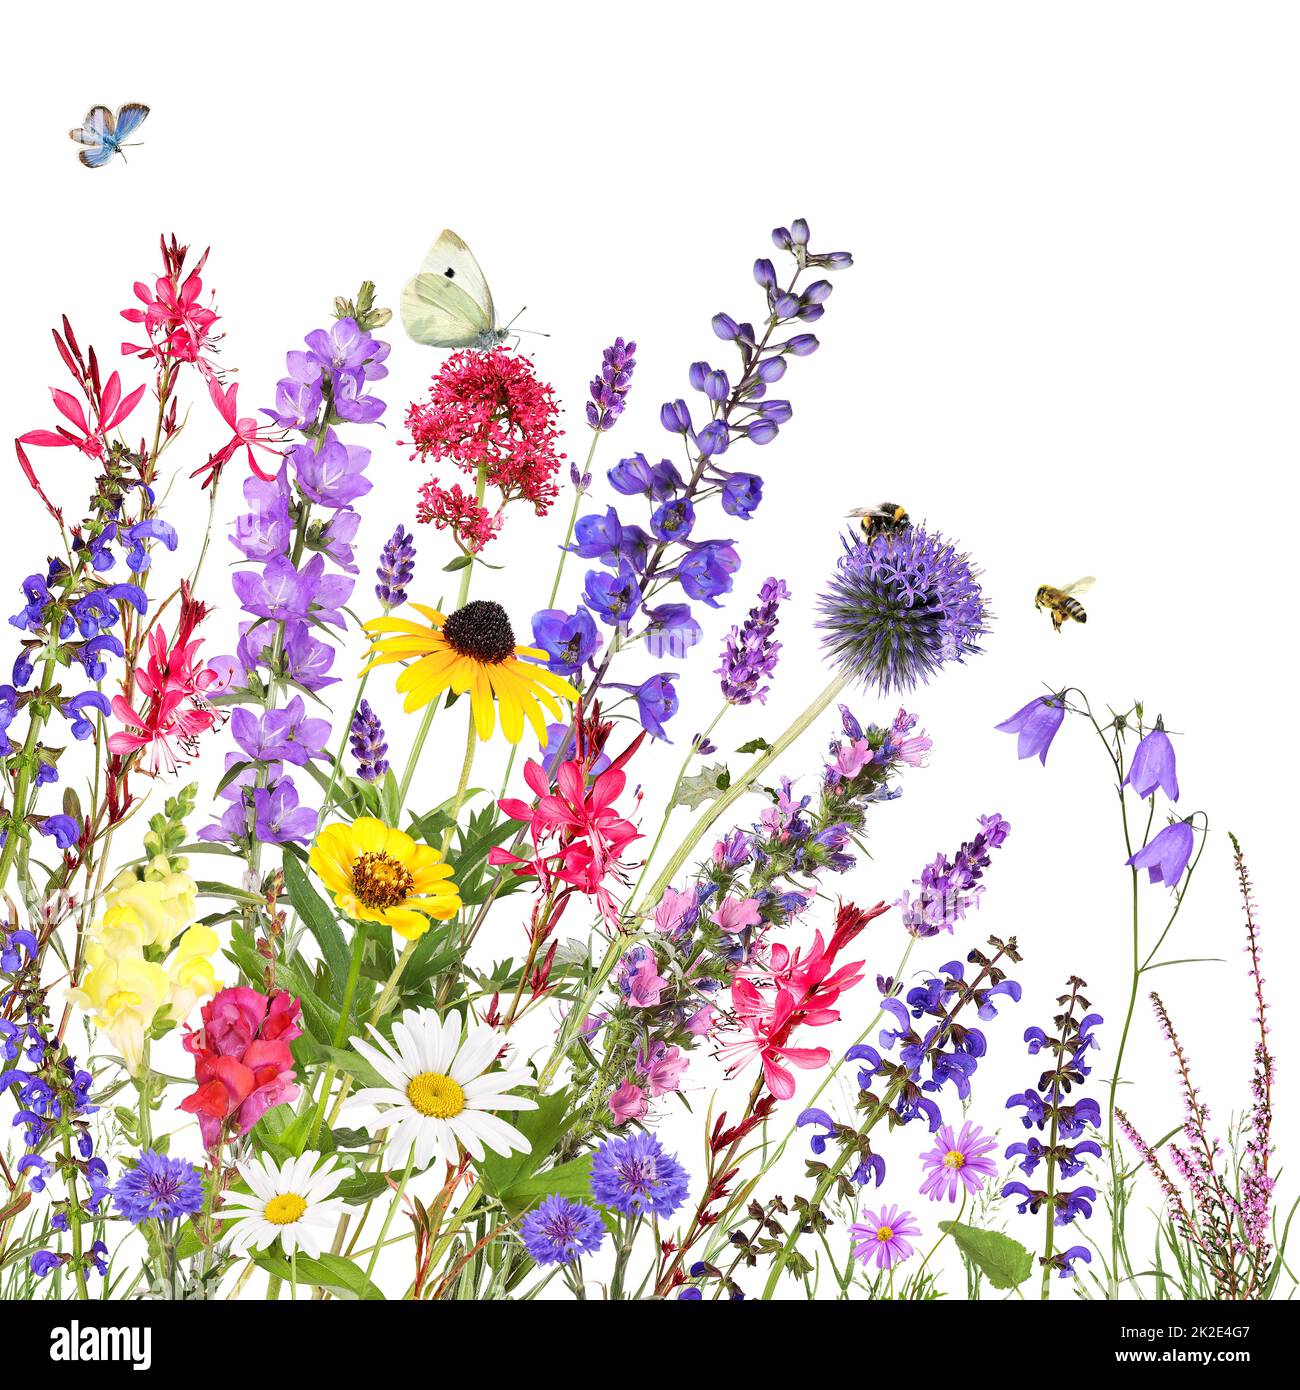 Colorful garden flowers with insects isolated Stock Photo